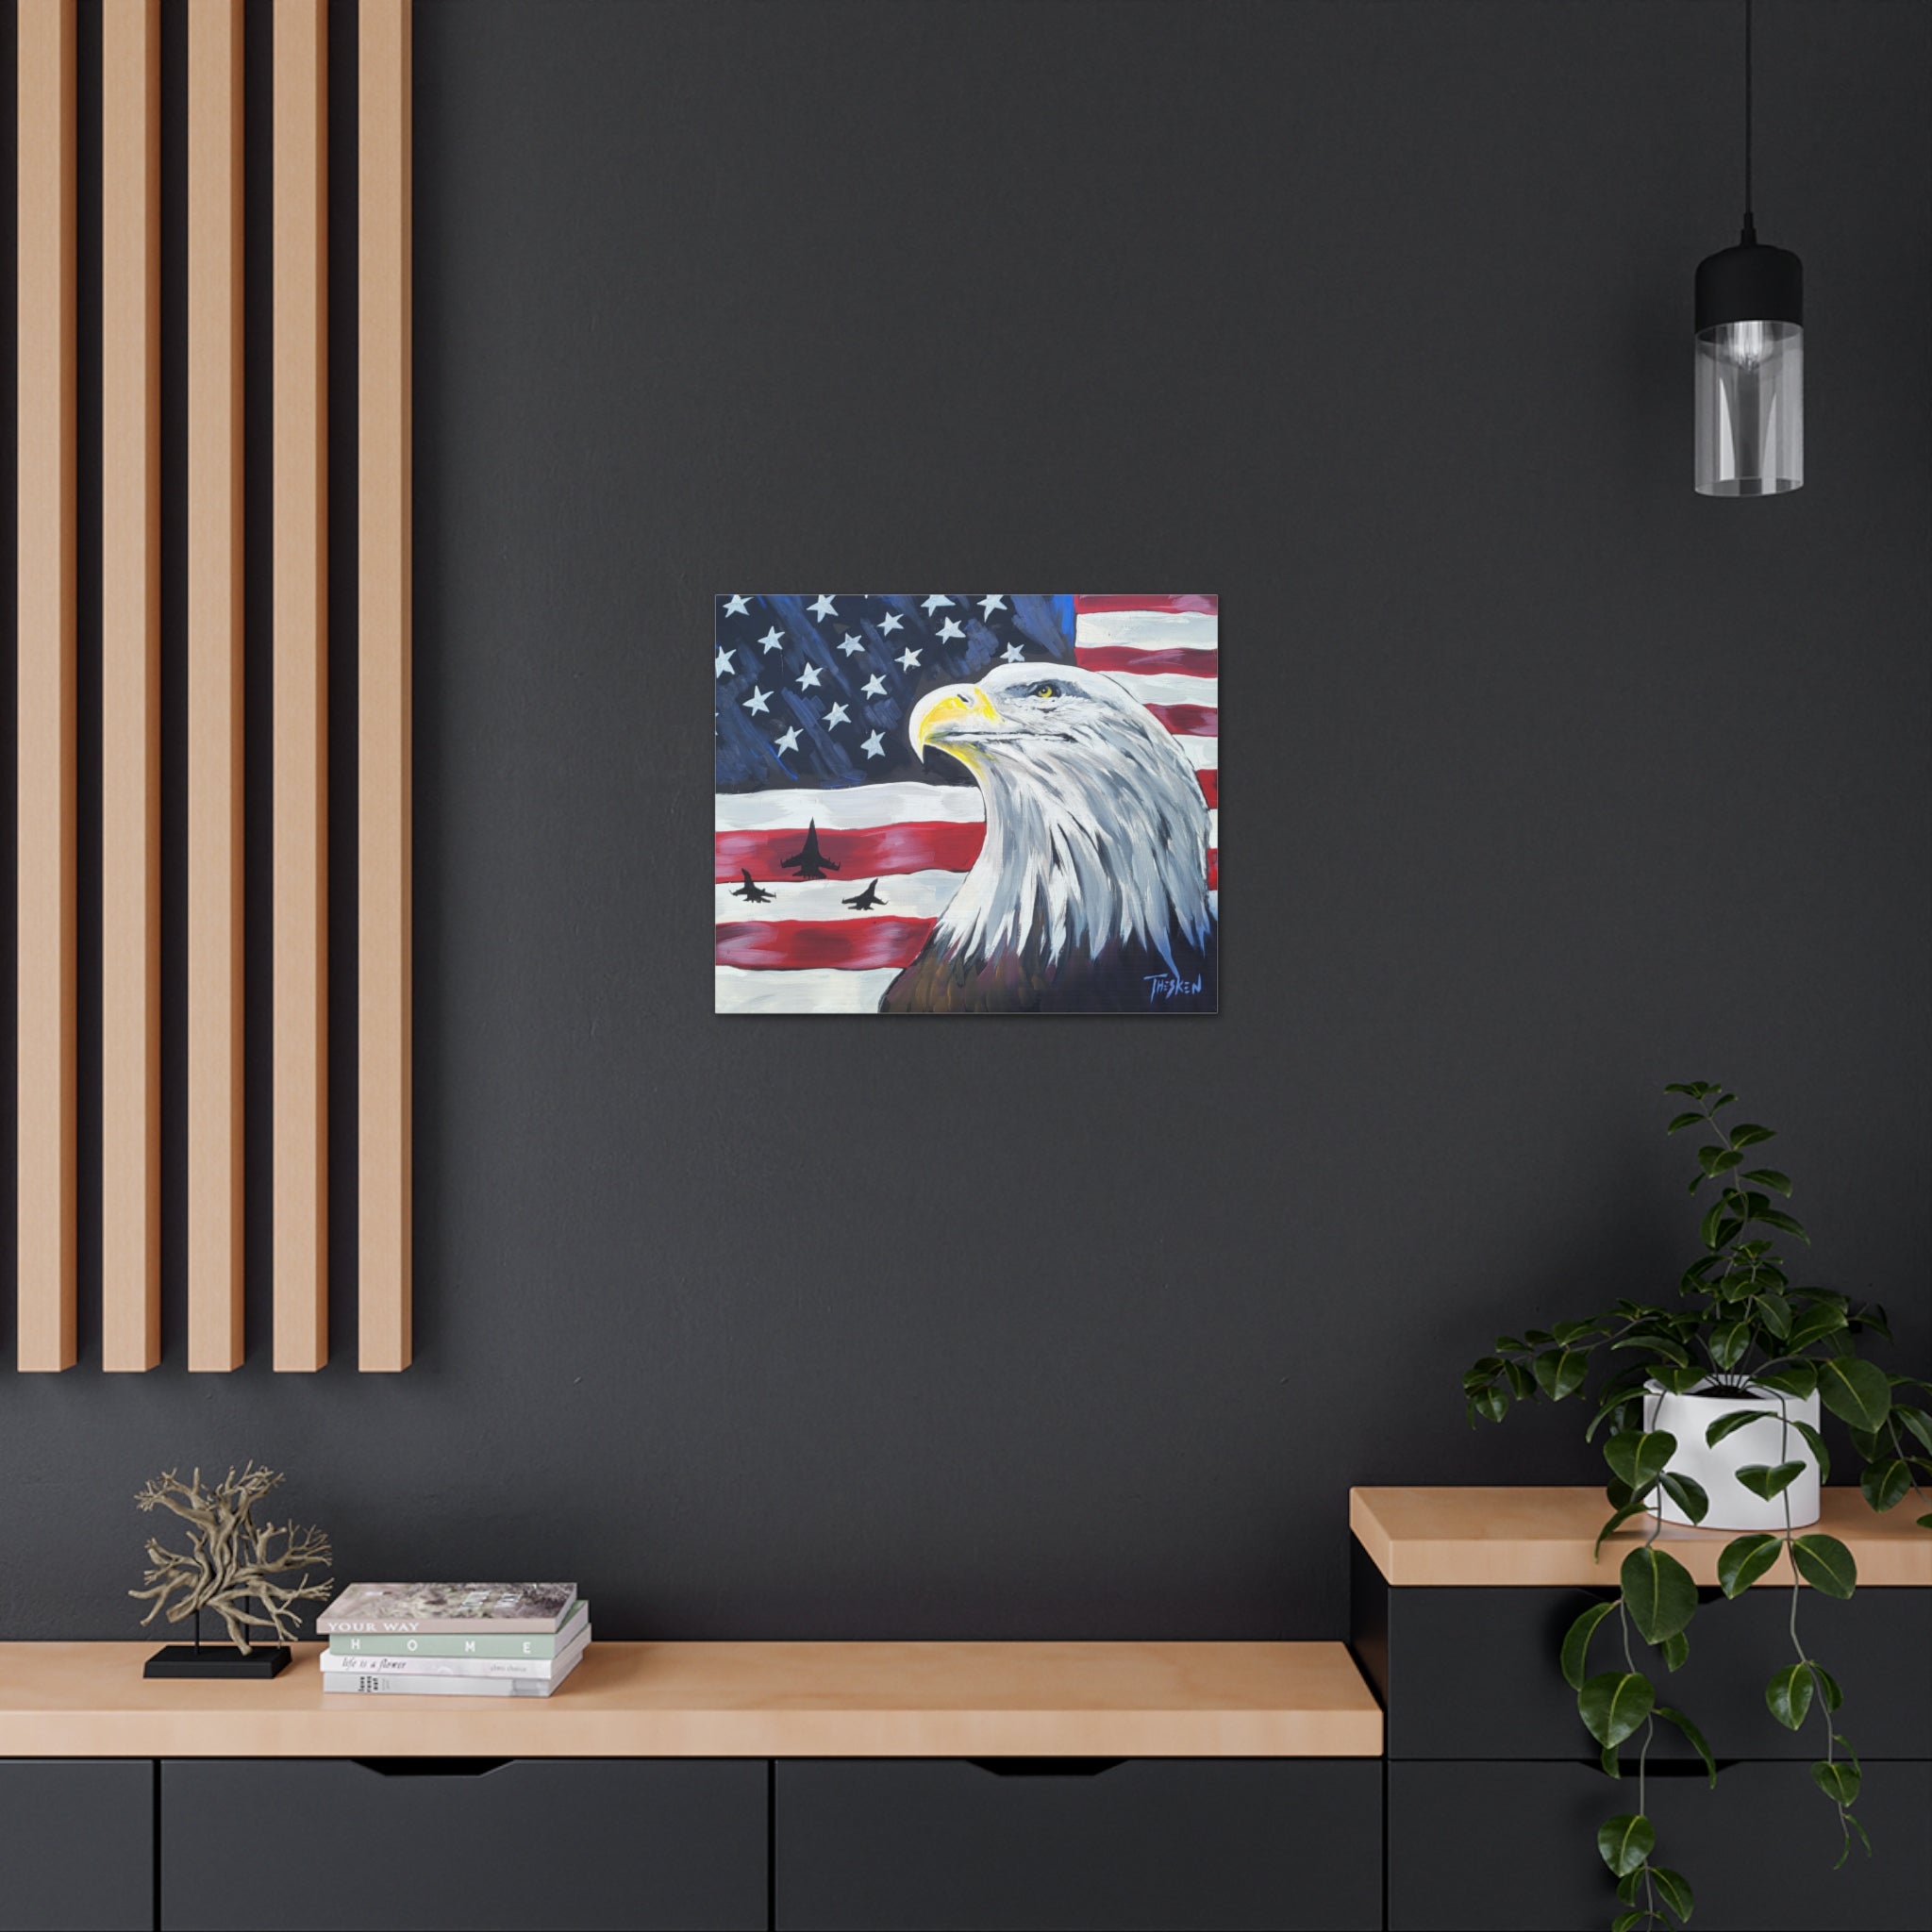 EAGLE JETS ON CANVAS